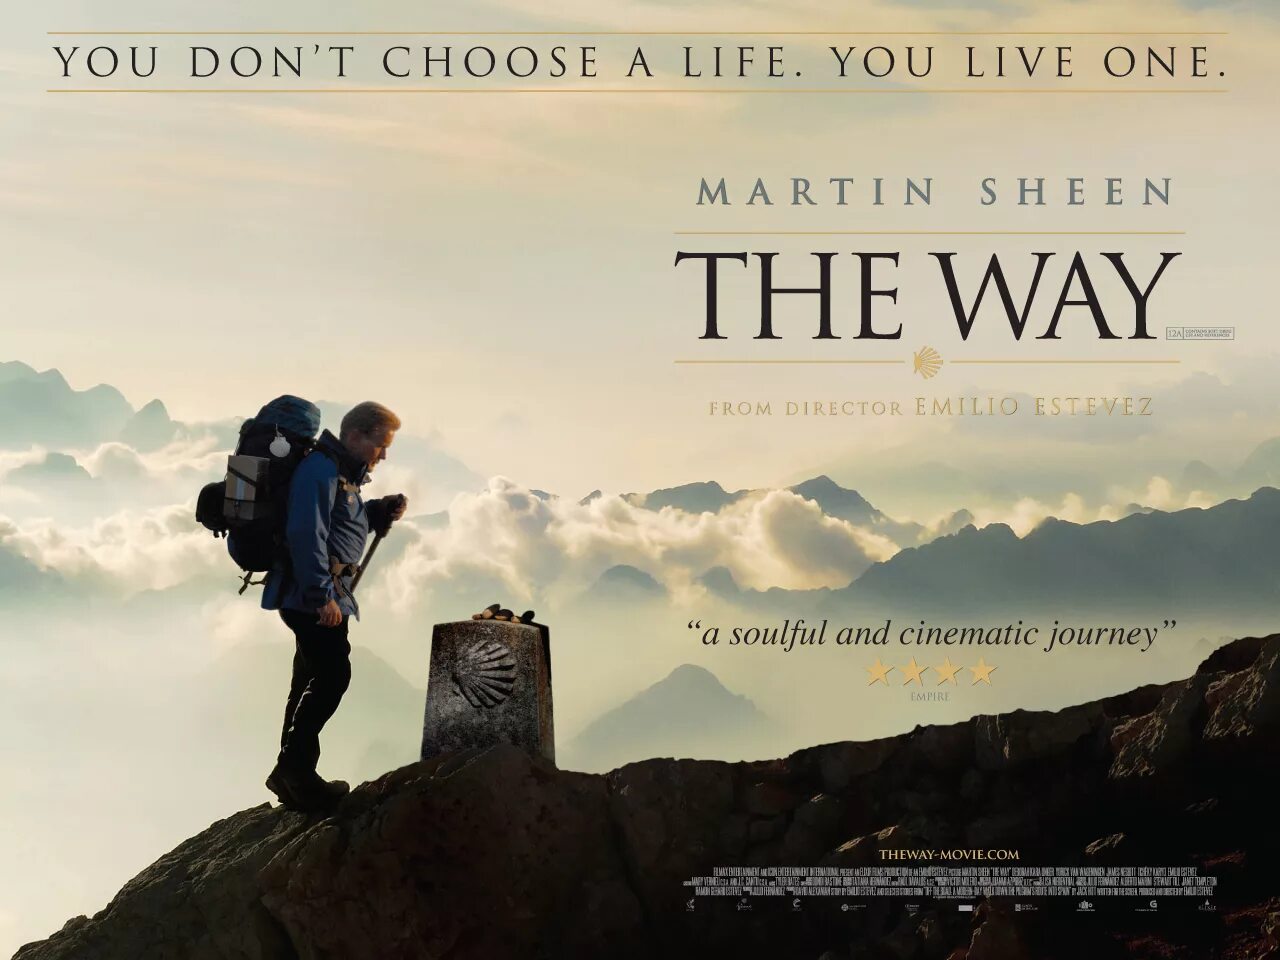 The way 2010 Martin Sheen. The way i see it being